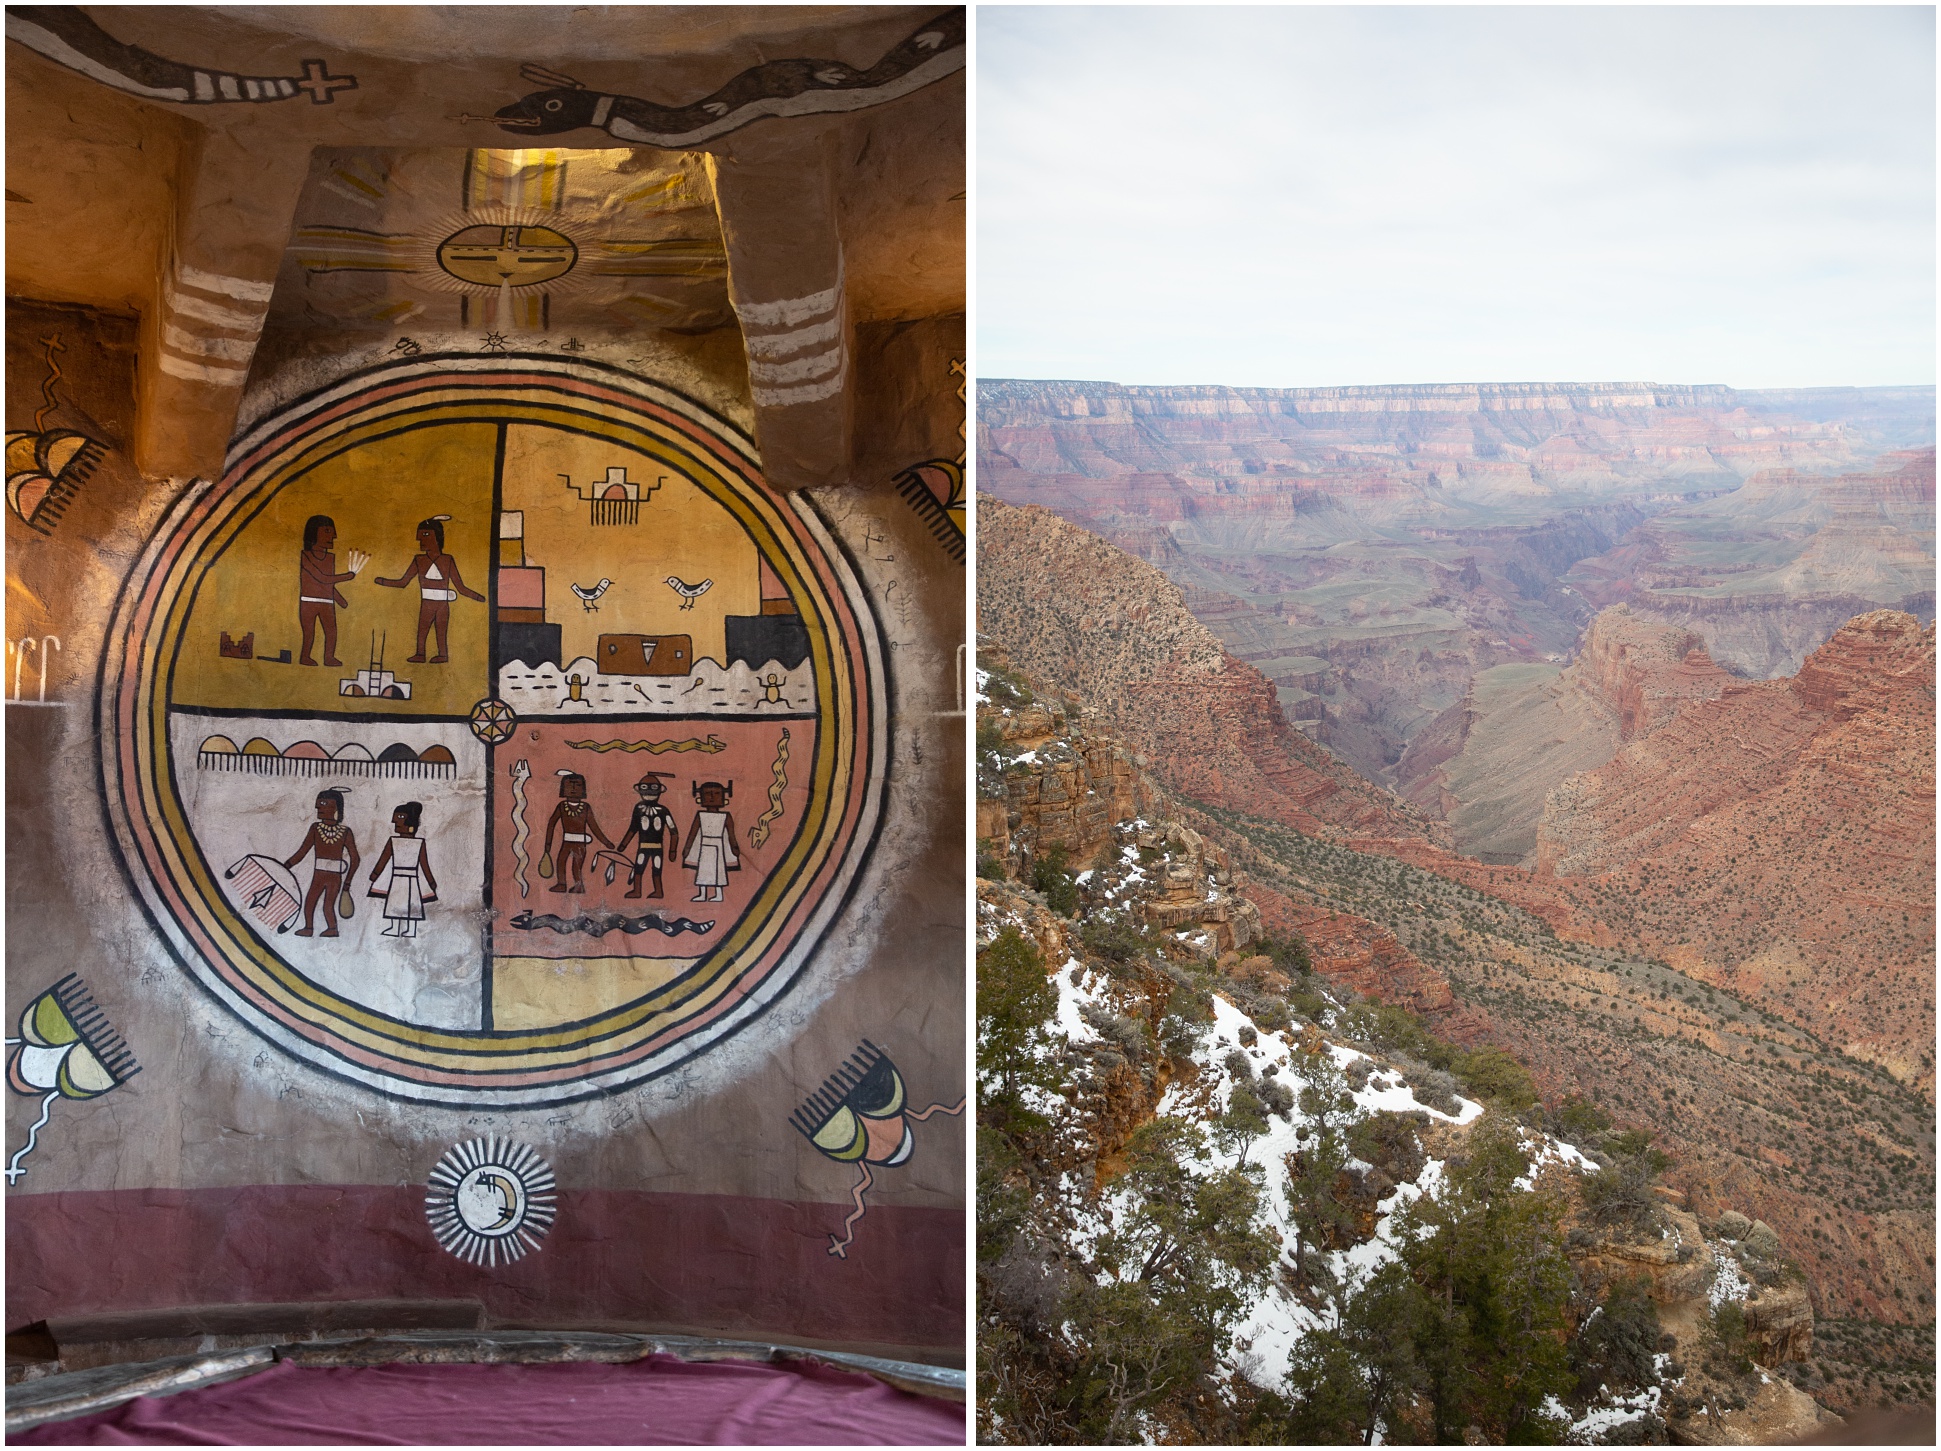 Two images of the details of the Grand Canyon